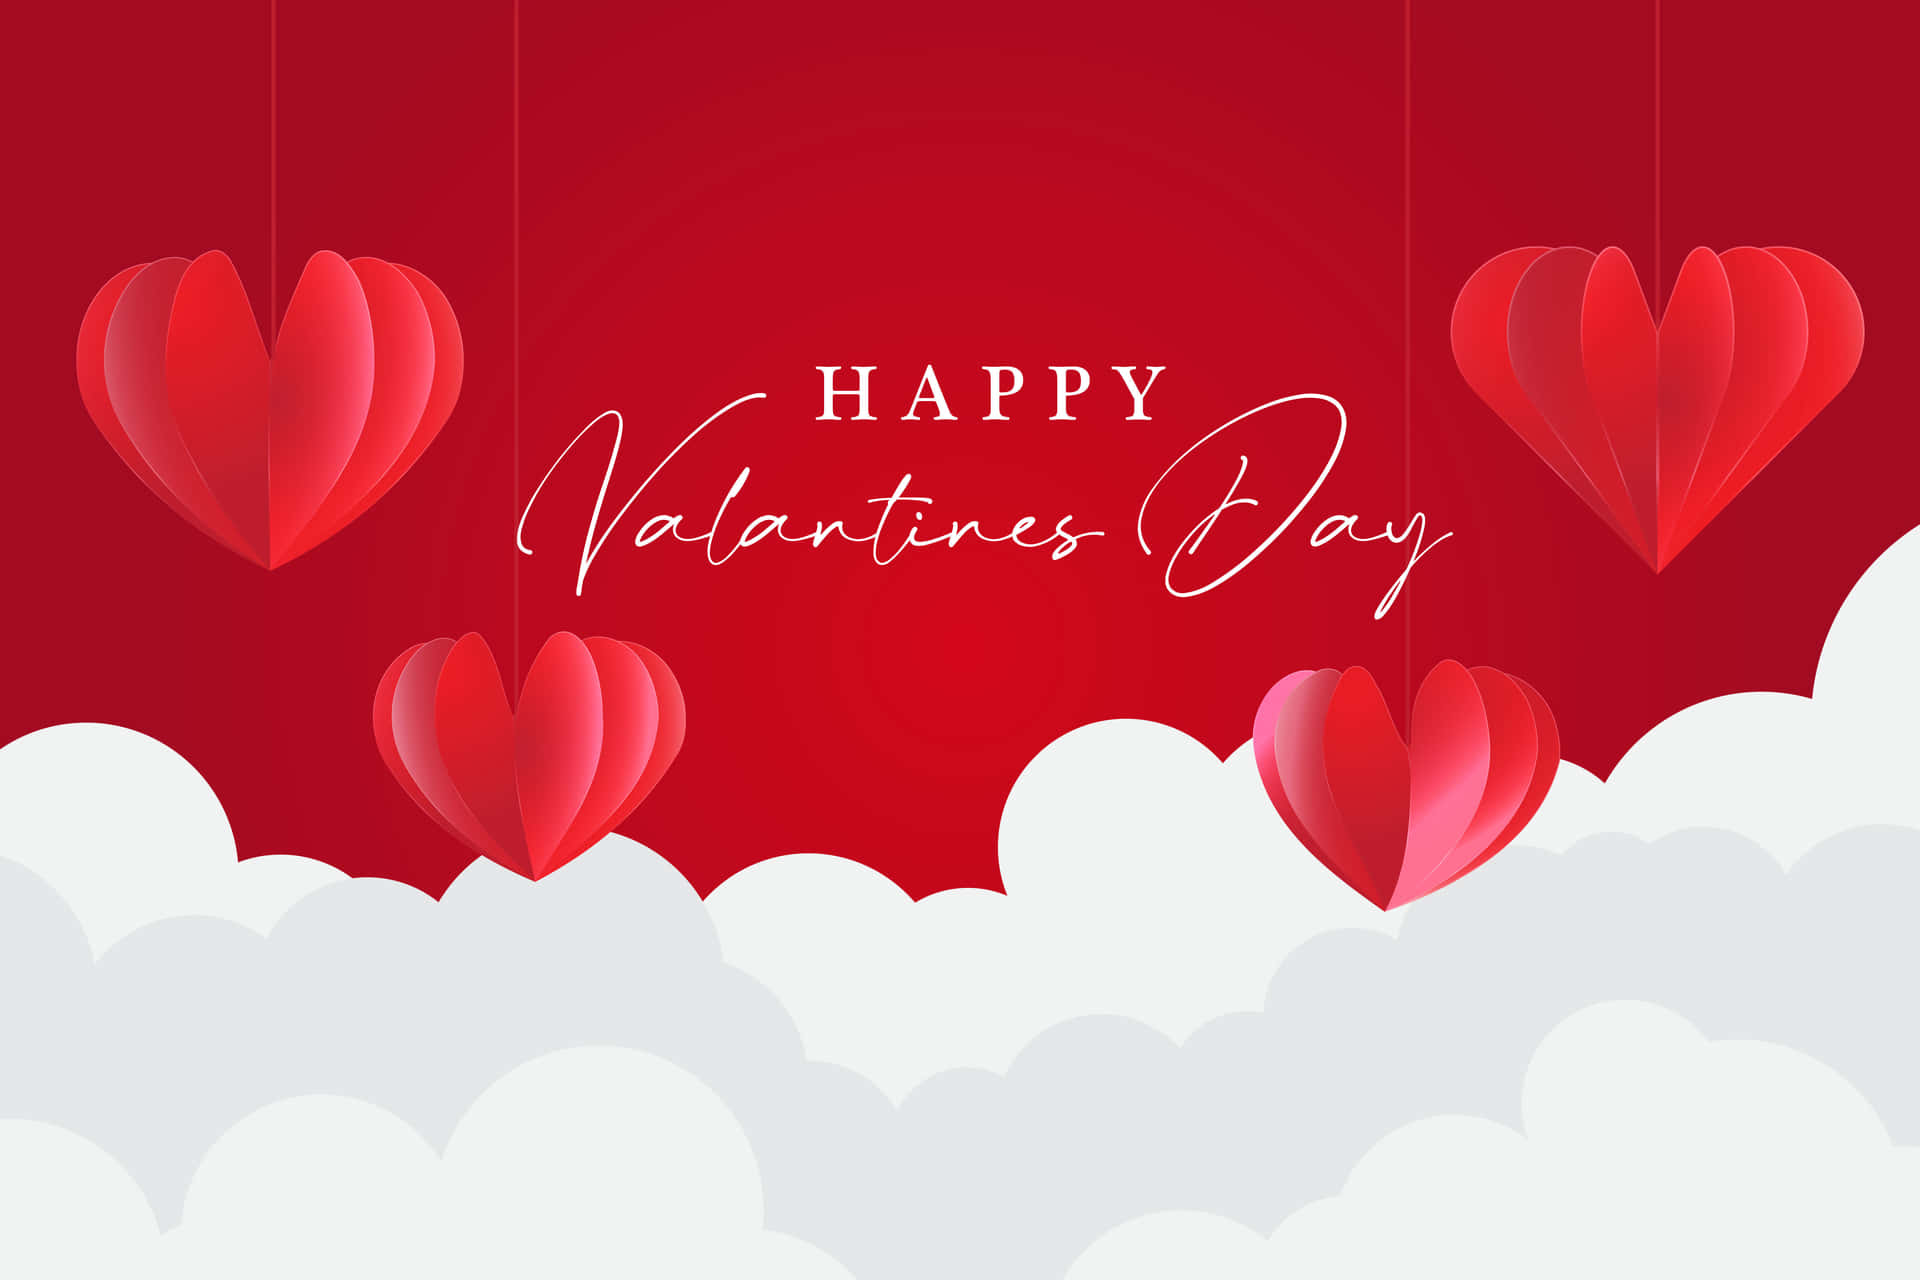 Love-filled Happy Valentines Day Background with Heart Balloons and Confetti